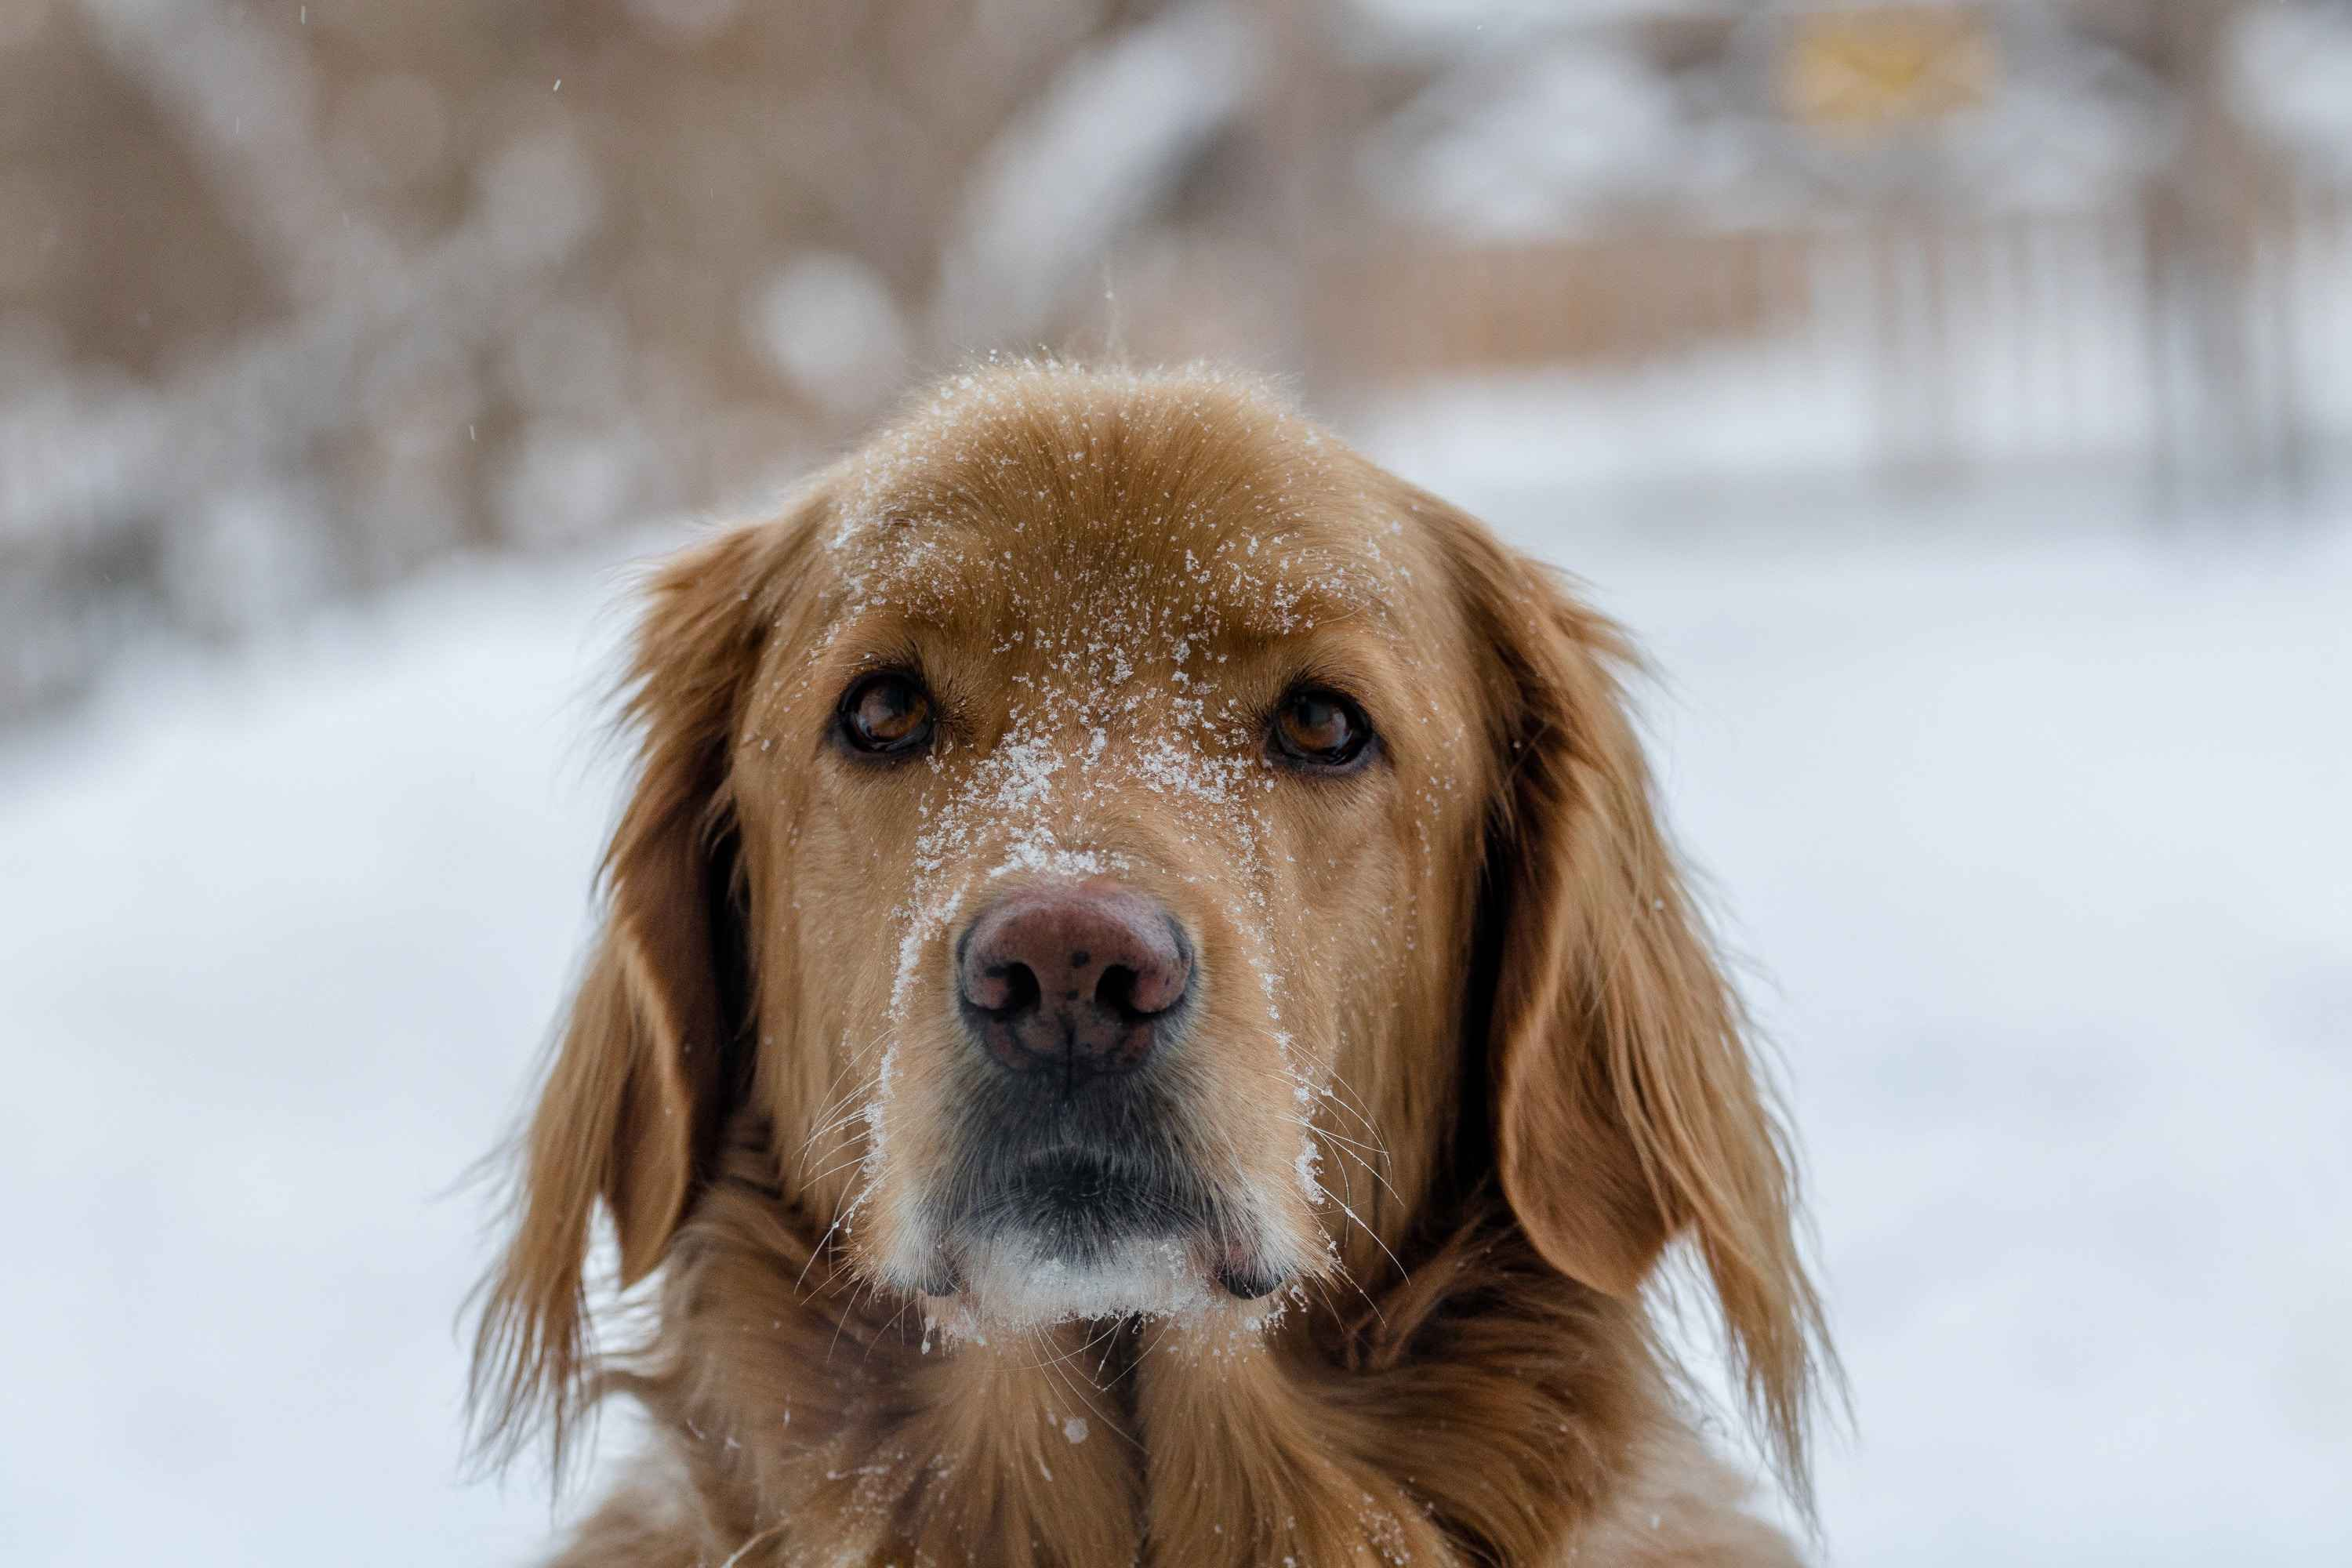 What are the most common health issues that Golden Retrievers are prone to?